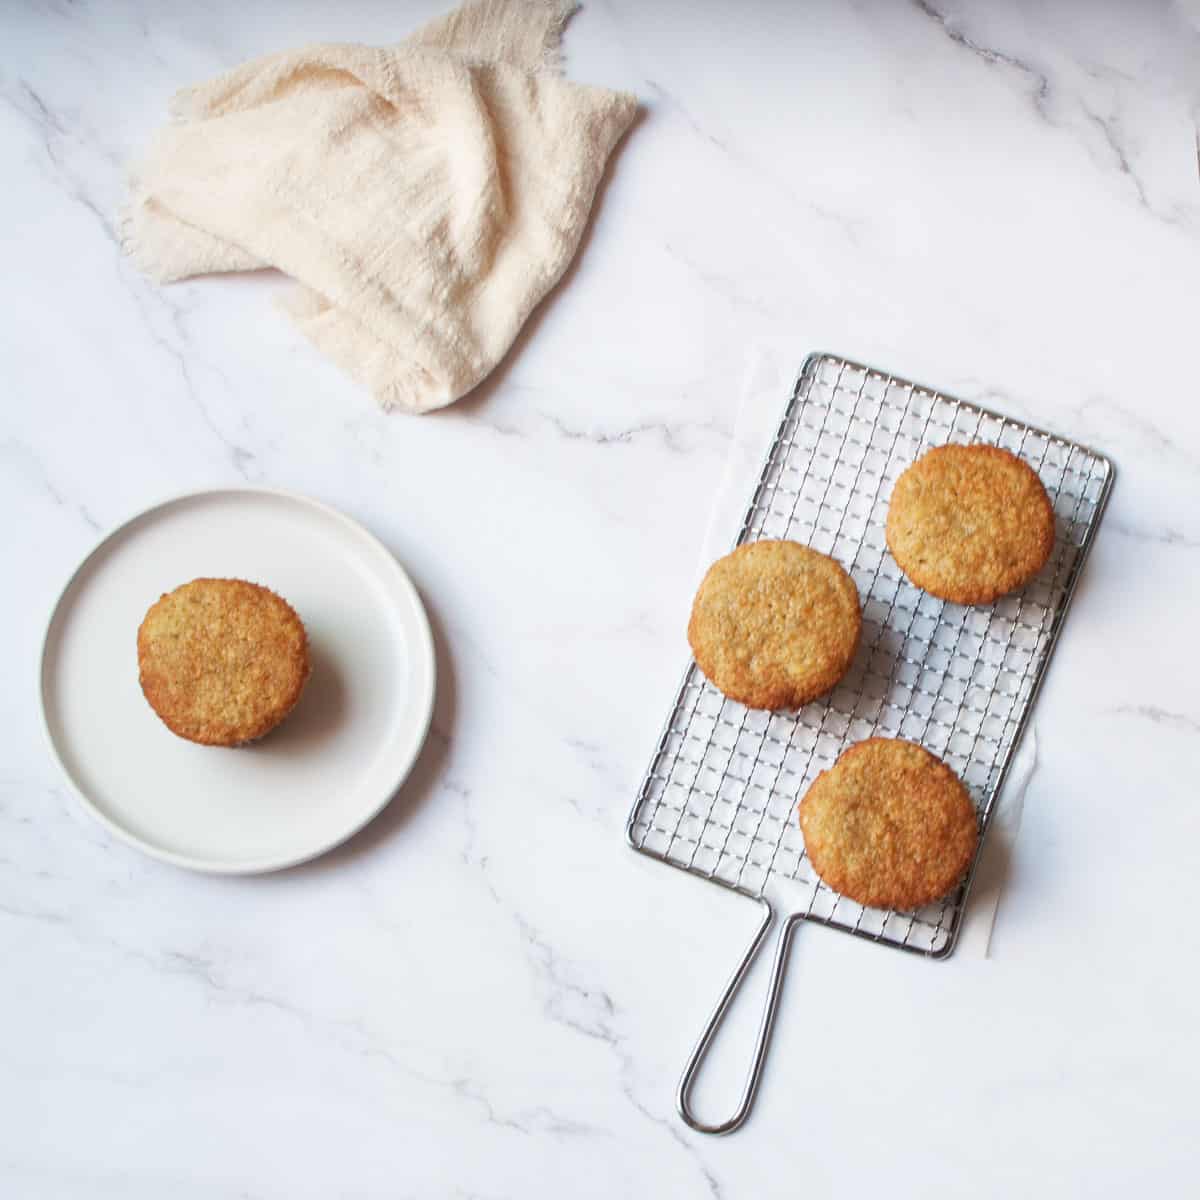 Banana Cardamom Muffins on a metal grater and white plate